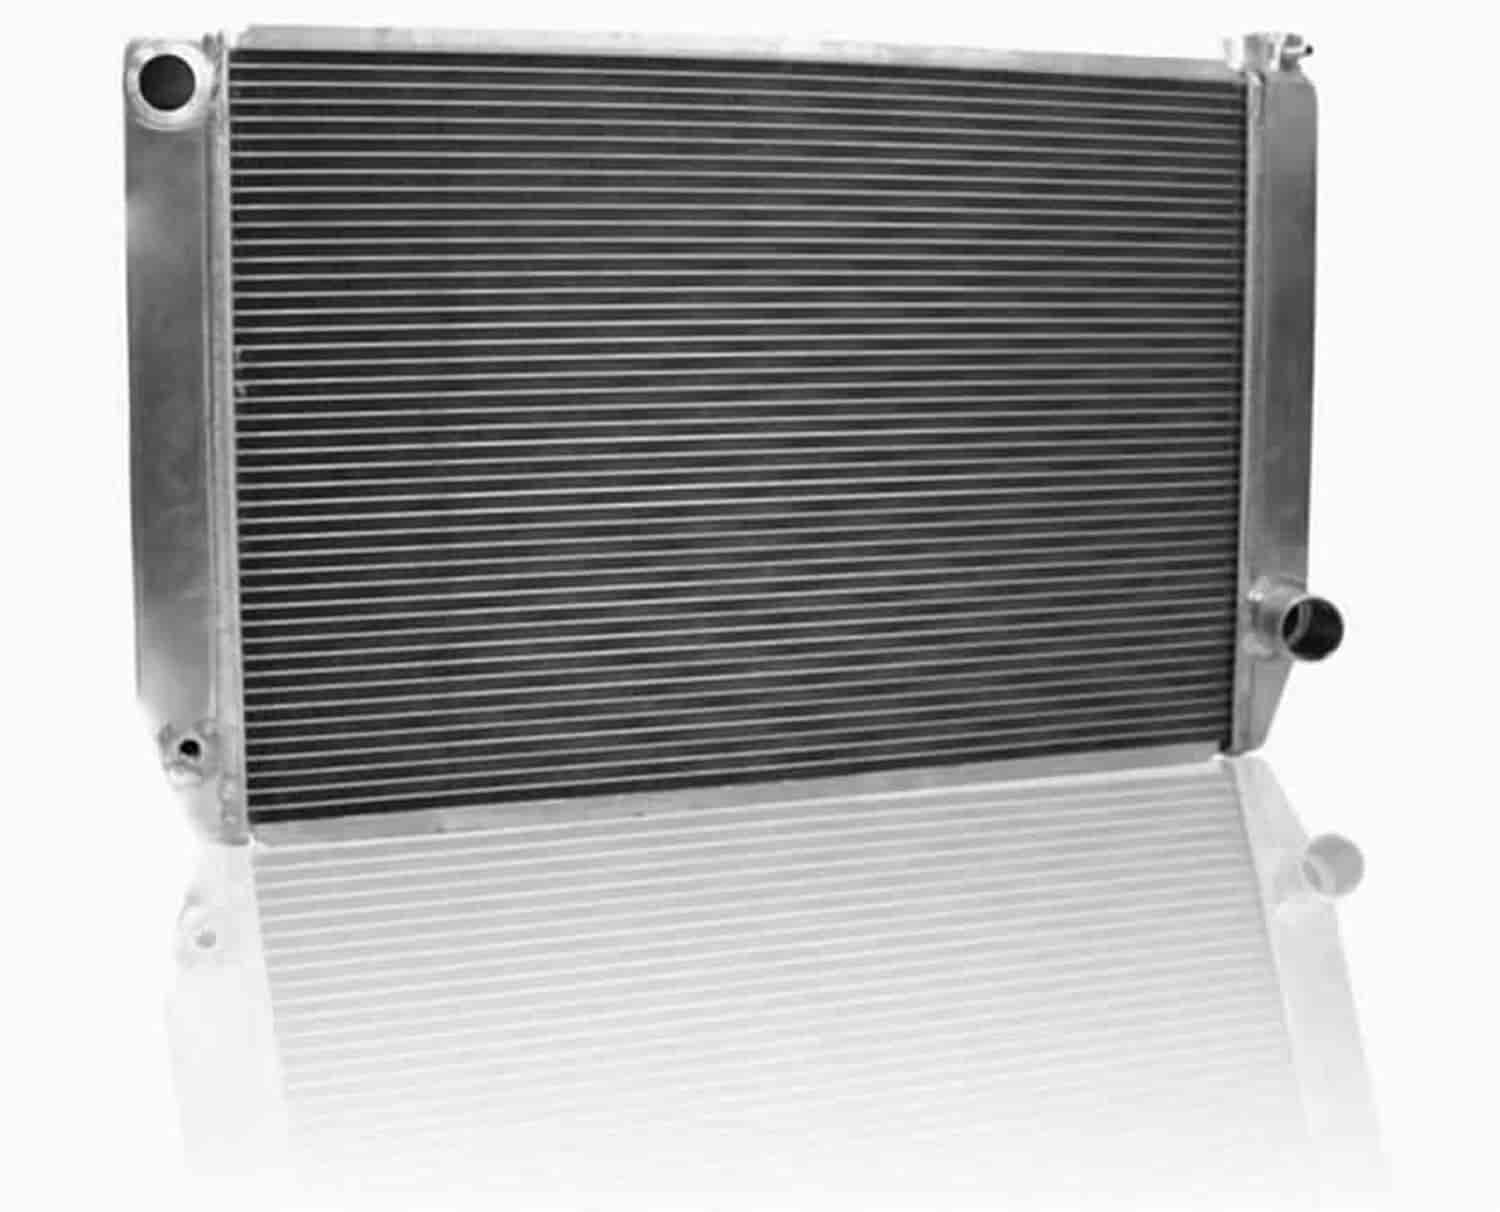 MegaCool Universal Fit Radiator Single Pass Crossflow Design 31" x 19" with 16AN Inlet